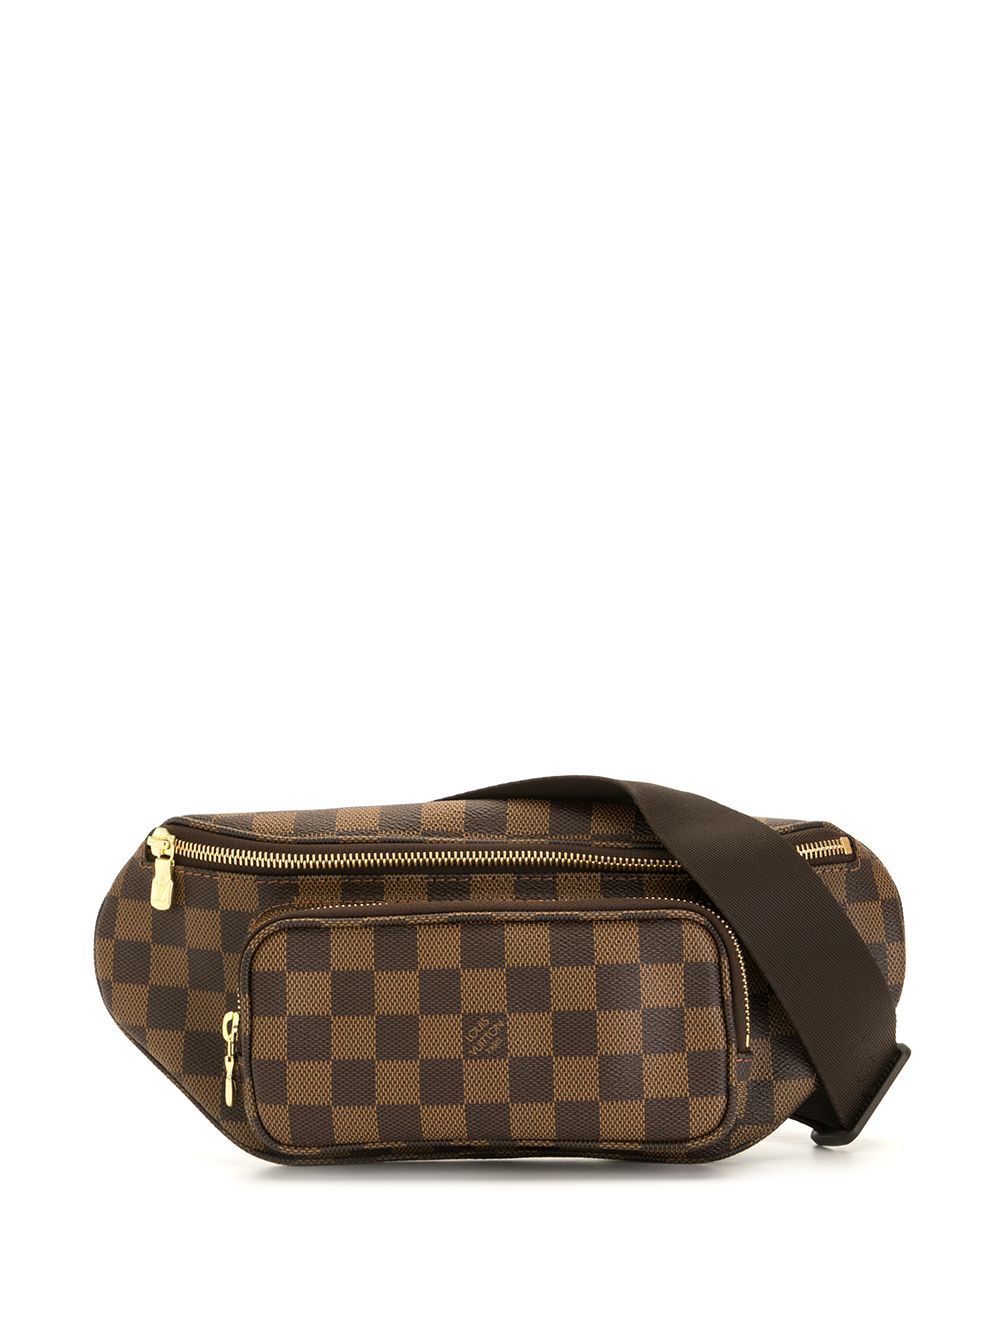 Louis+Vuitton+Melville+Belt+Bag+%26+Fanny+Pack+Brown+Leather for